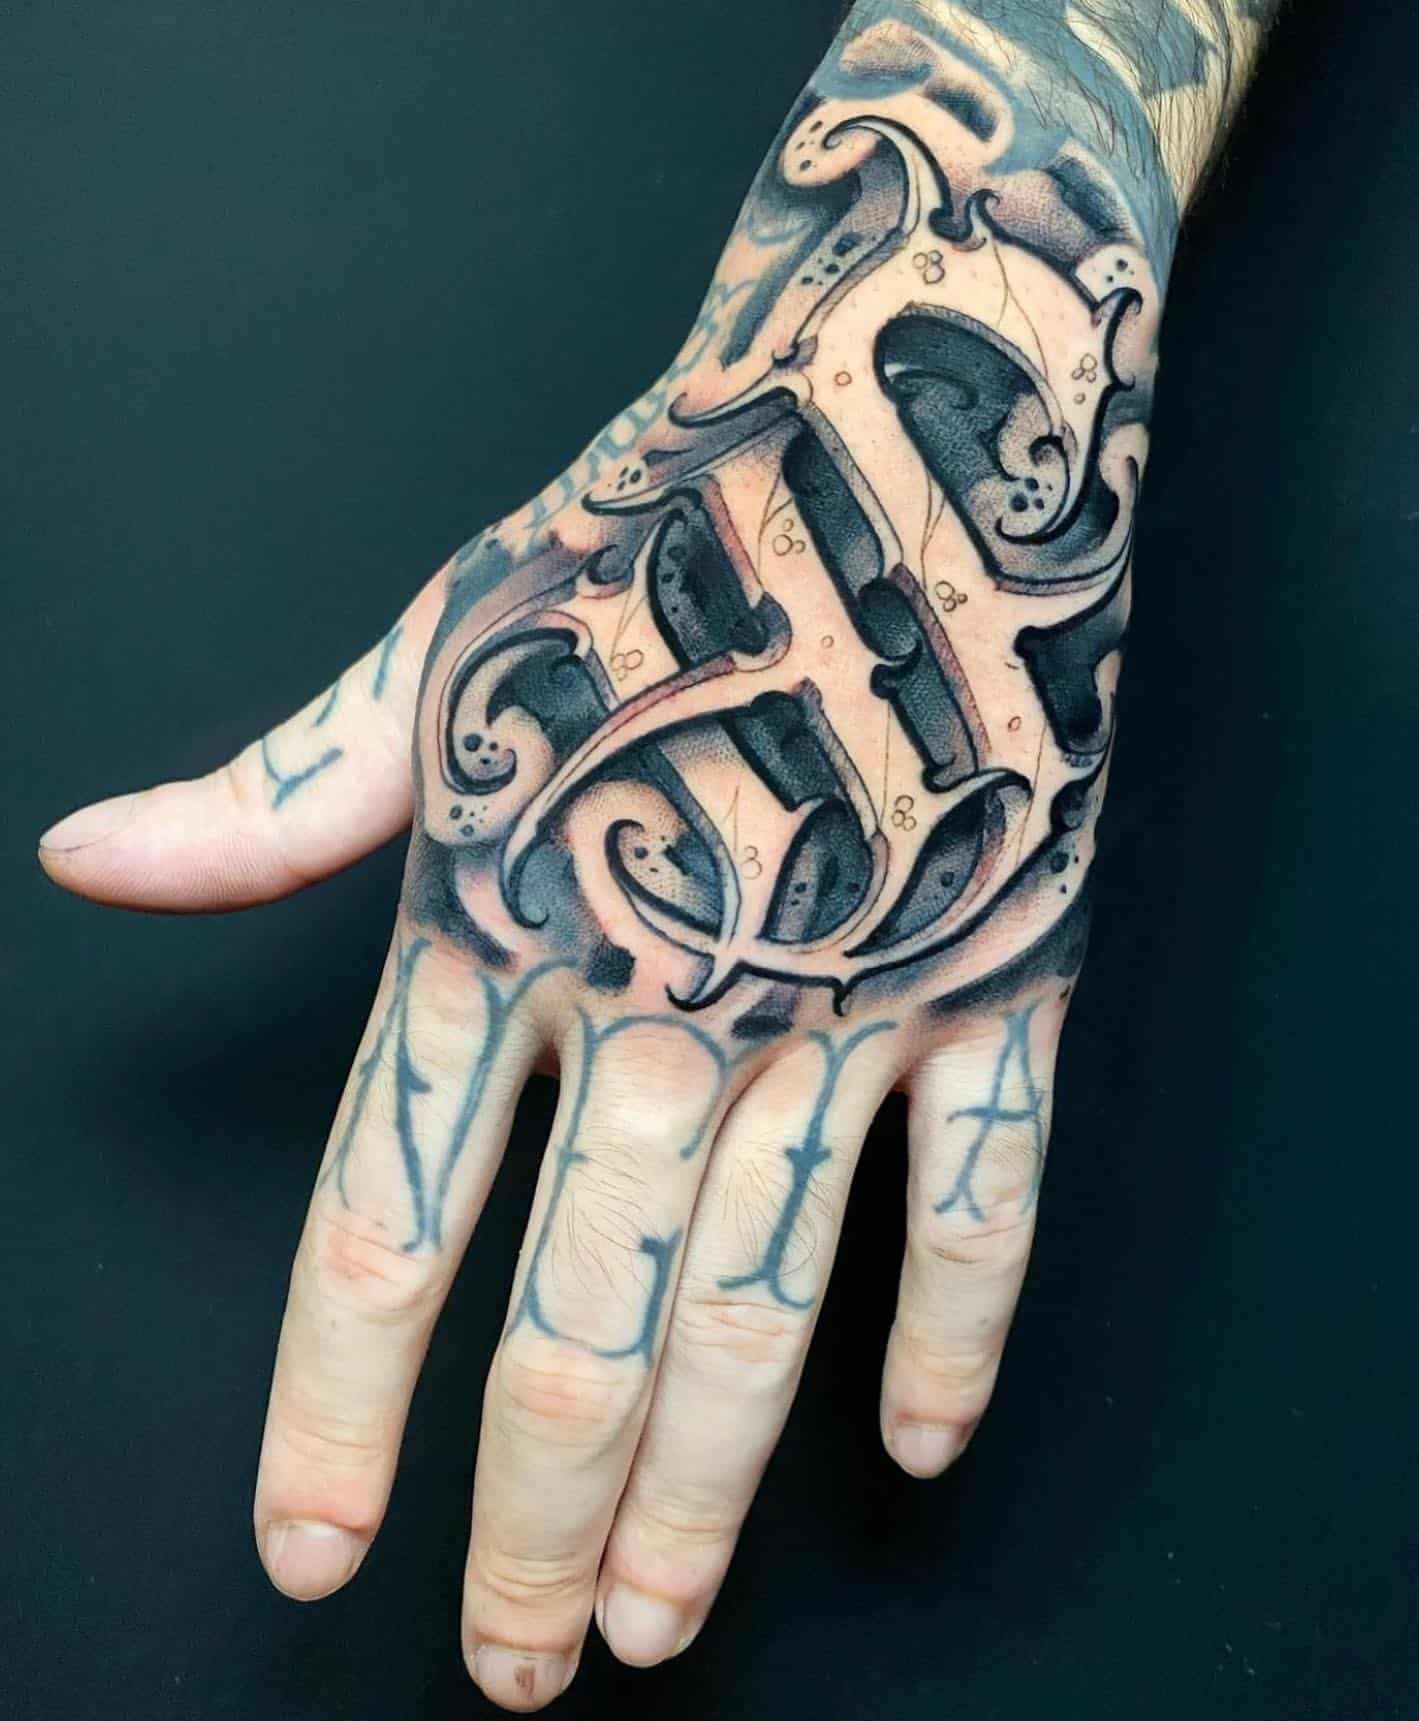 Share 99+ about cool tattoos your hand super cool .vn